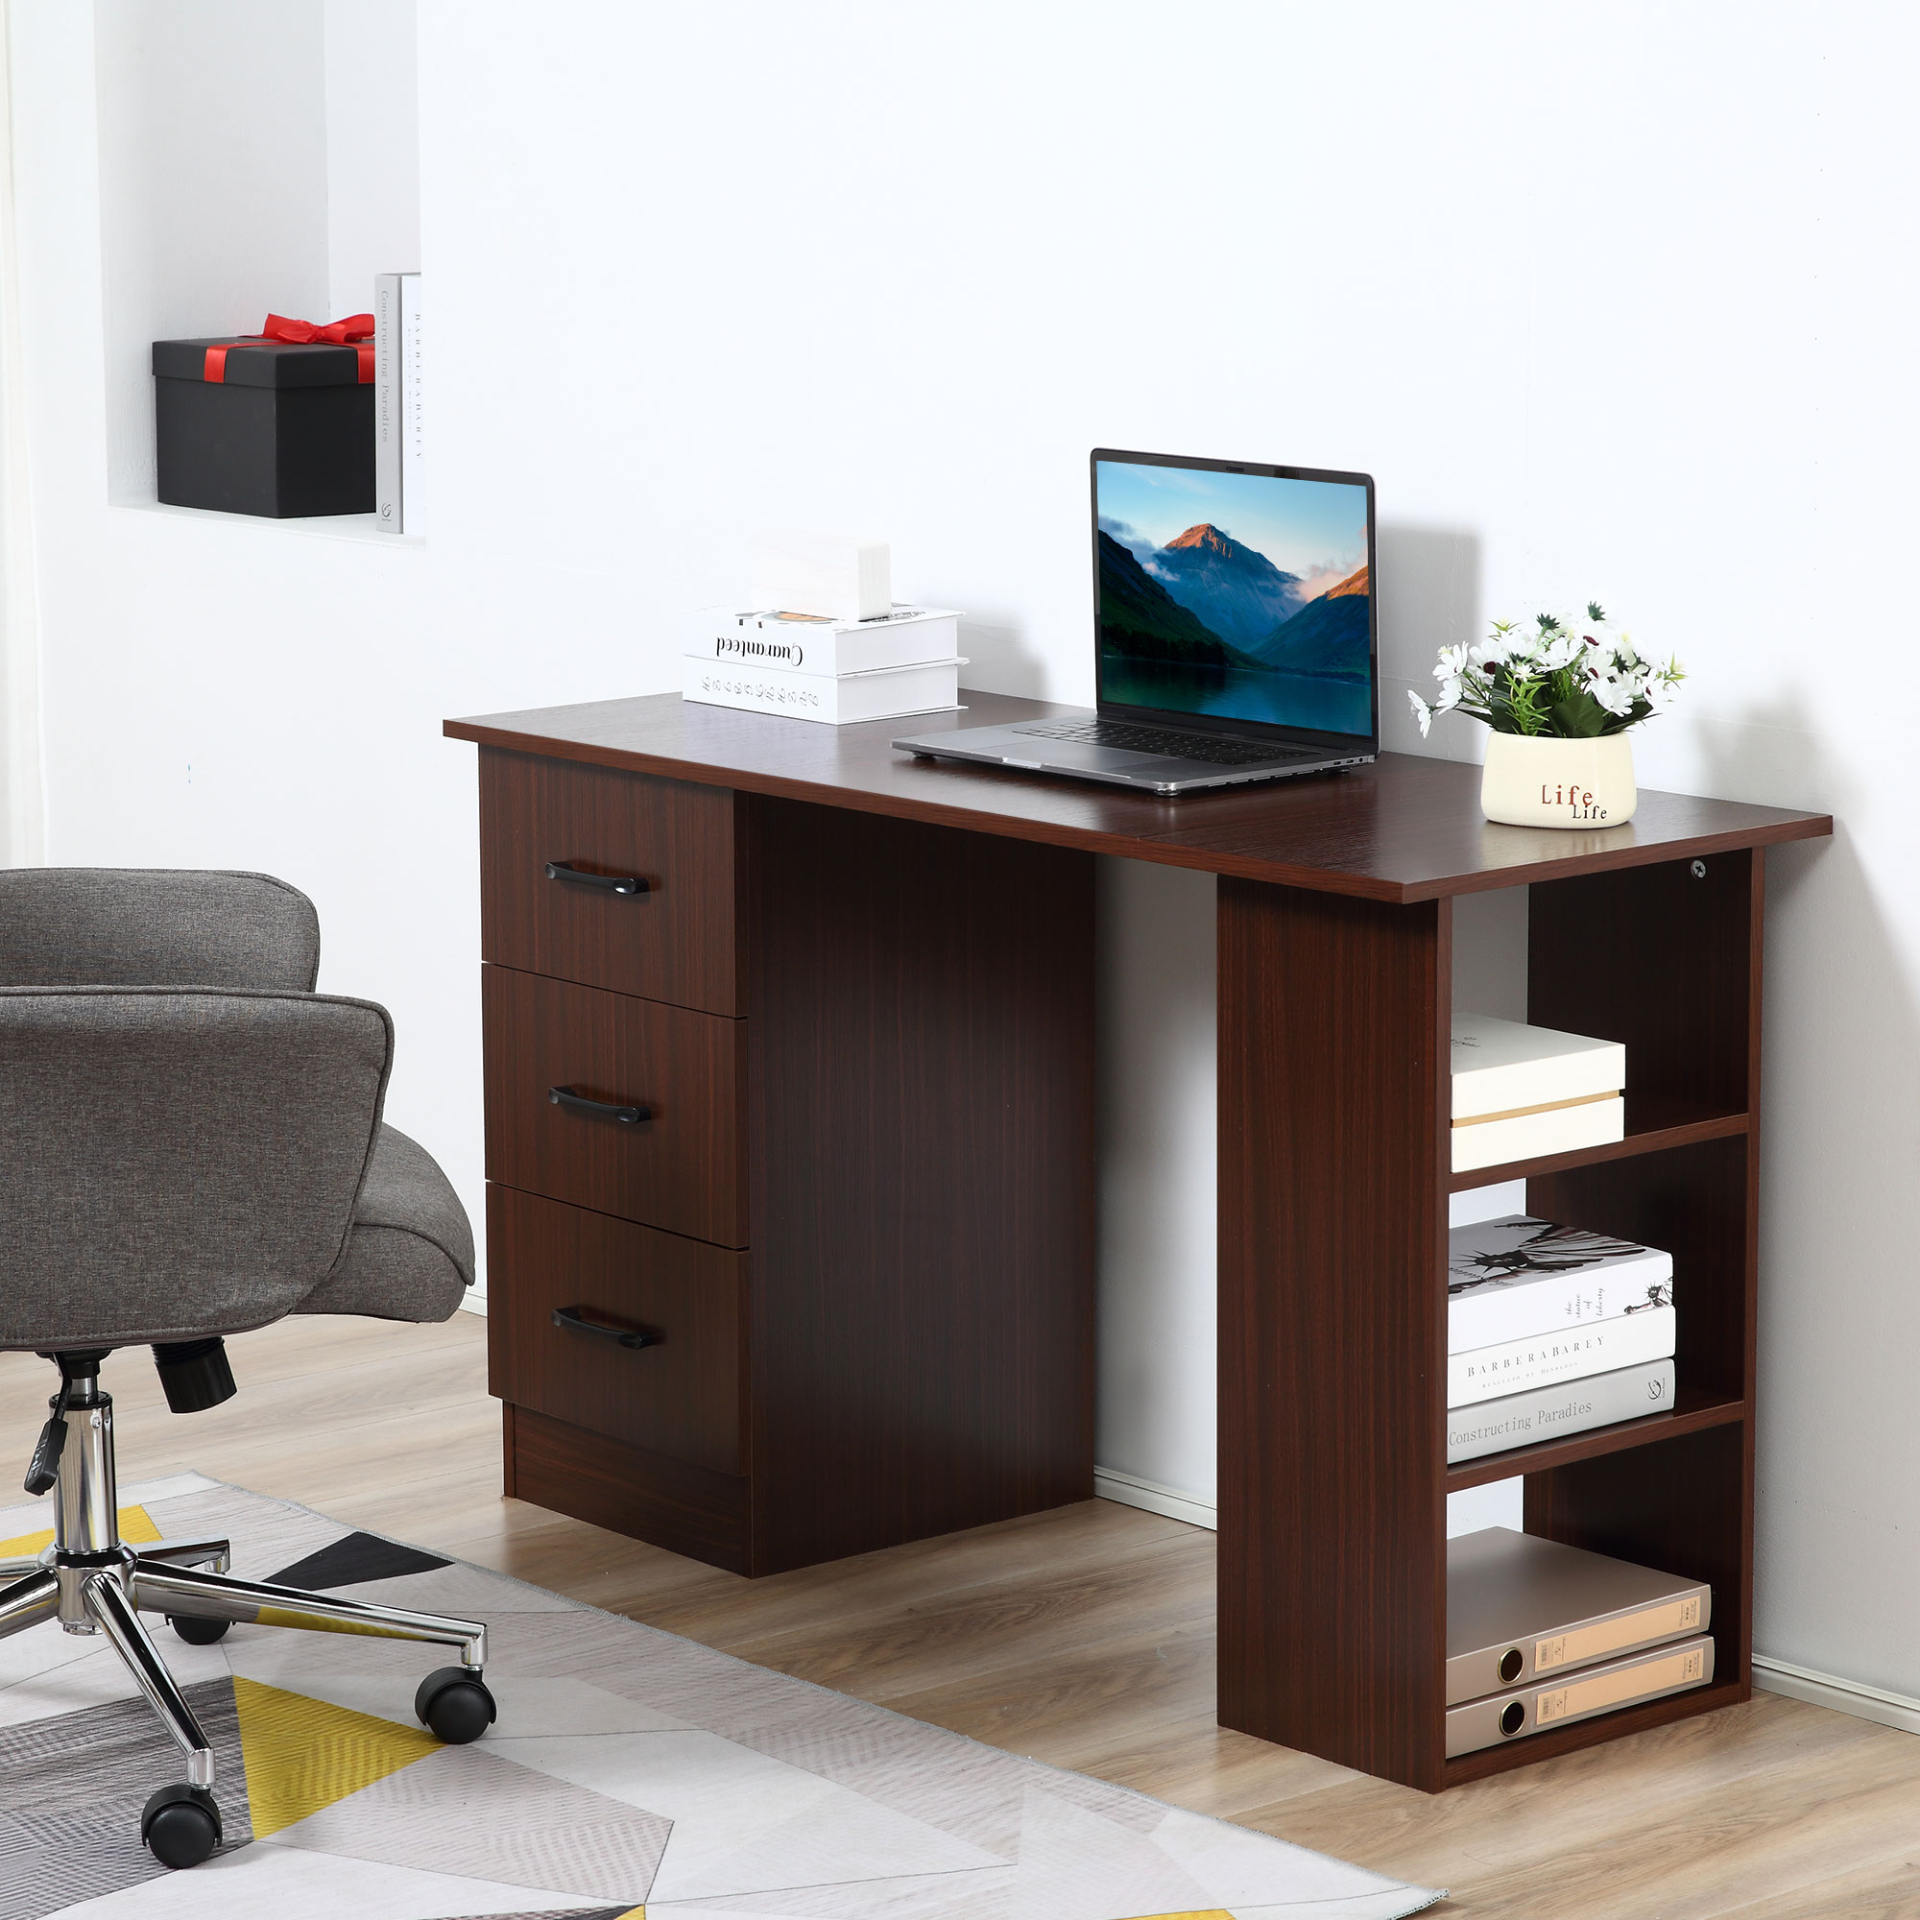 HOMCOM 120cm Computer Desk with Storage Shelves Drawers, Writing Table Study Workstation for Home Office, Walnut Brown